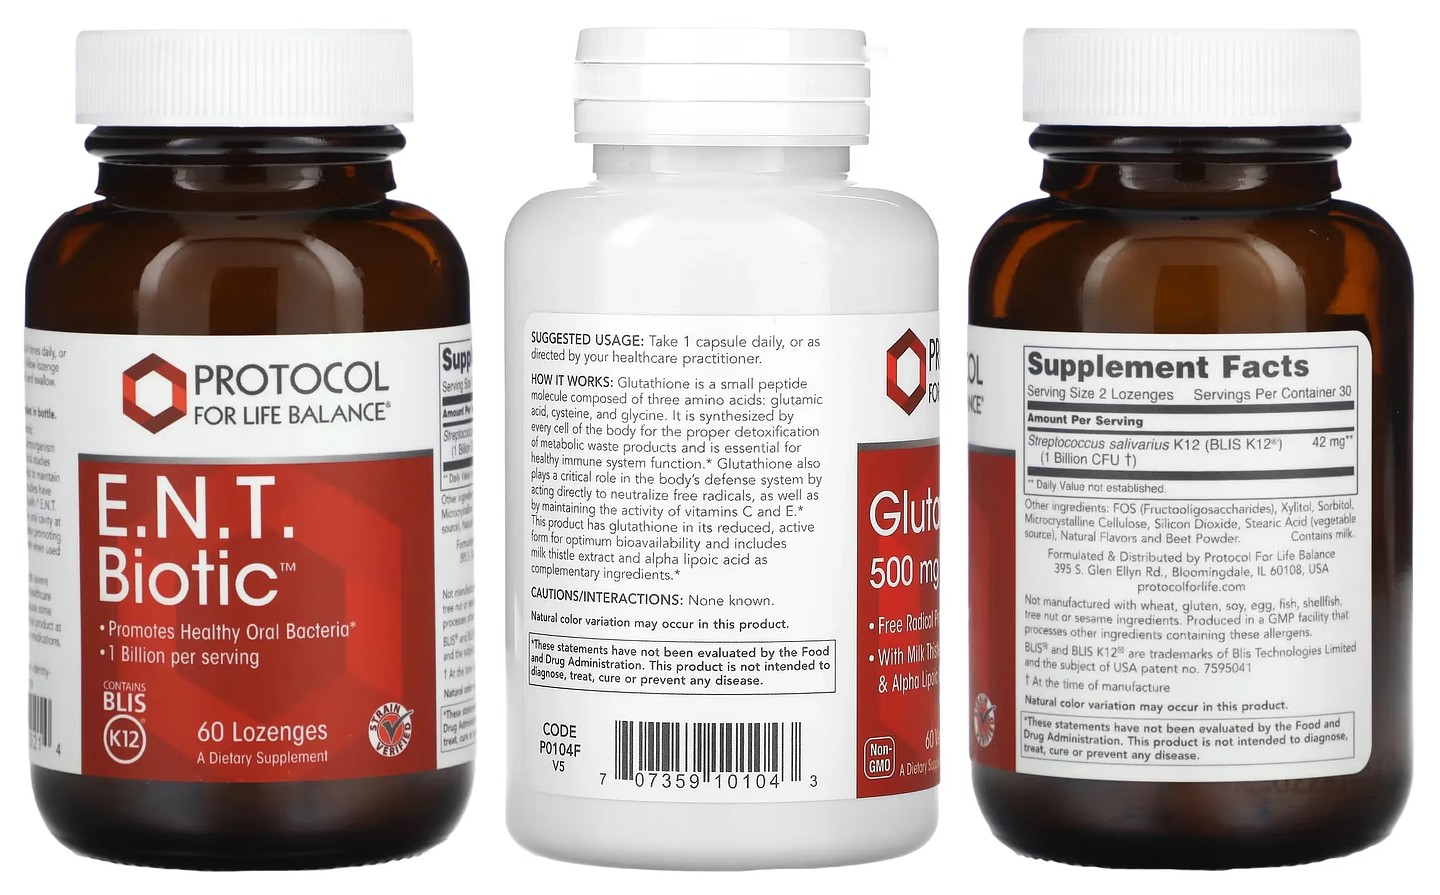 Protocol for Life Balance, E.N.T. Biotic packaging